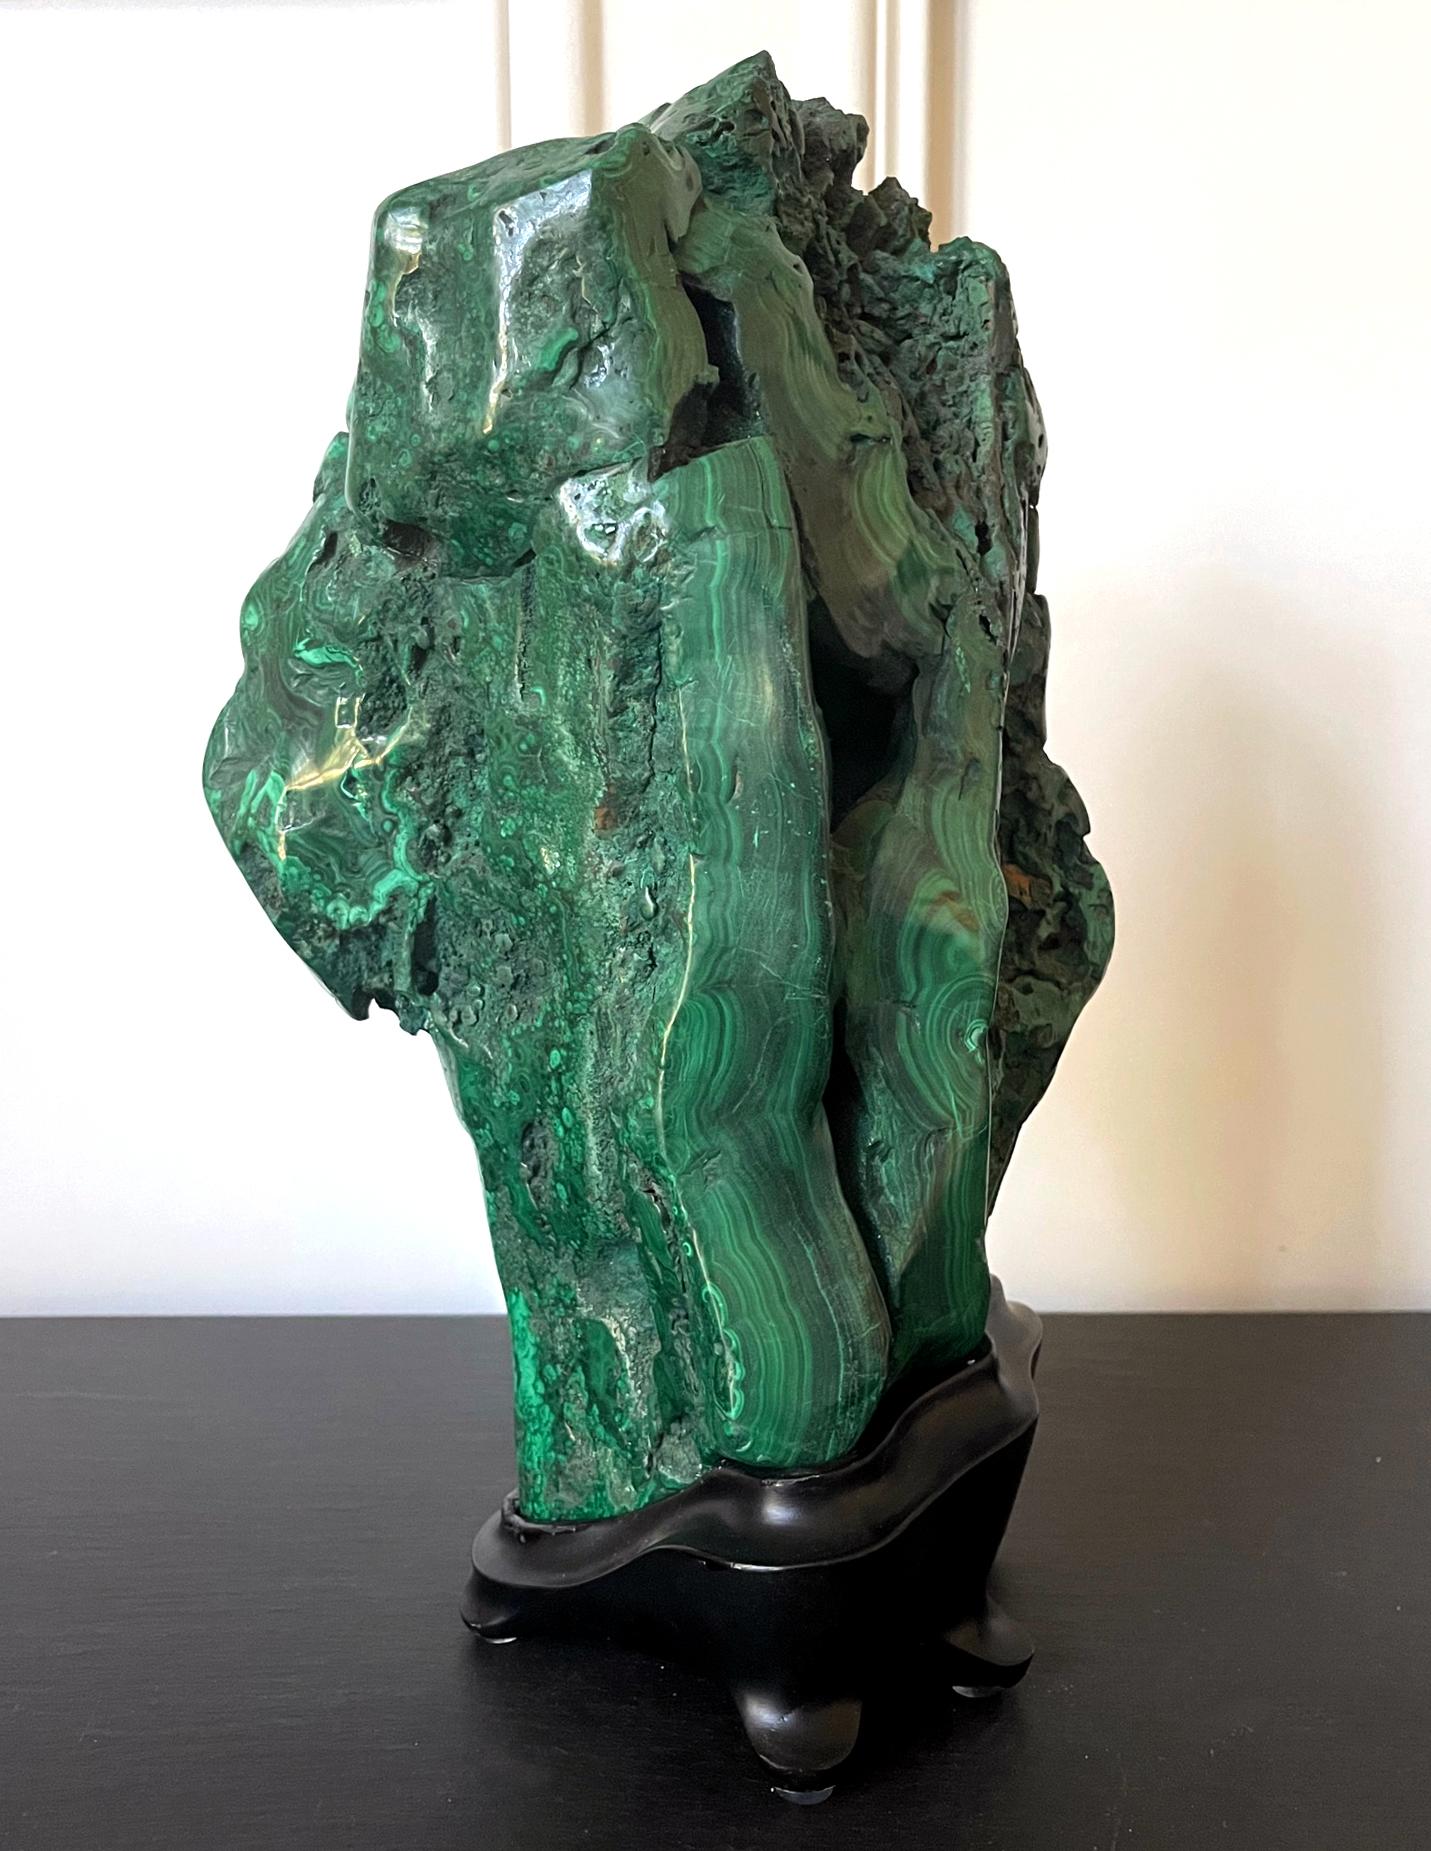 A large malachite rock specimen with intense green and black colors fitted on a wood stand and displayed as a Chinese scholar stone. The gemstone in the vertical botryoidal form was a solid boulder of impressive size and weight. It was polished on